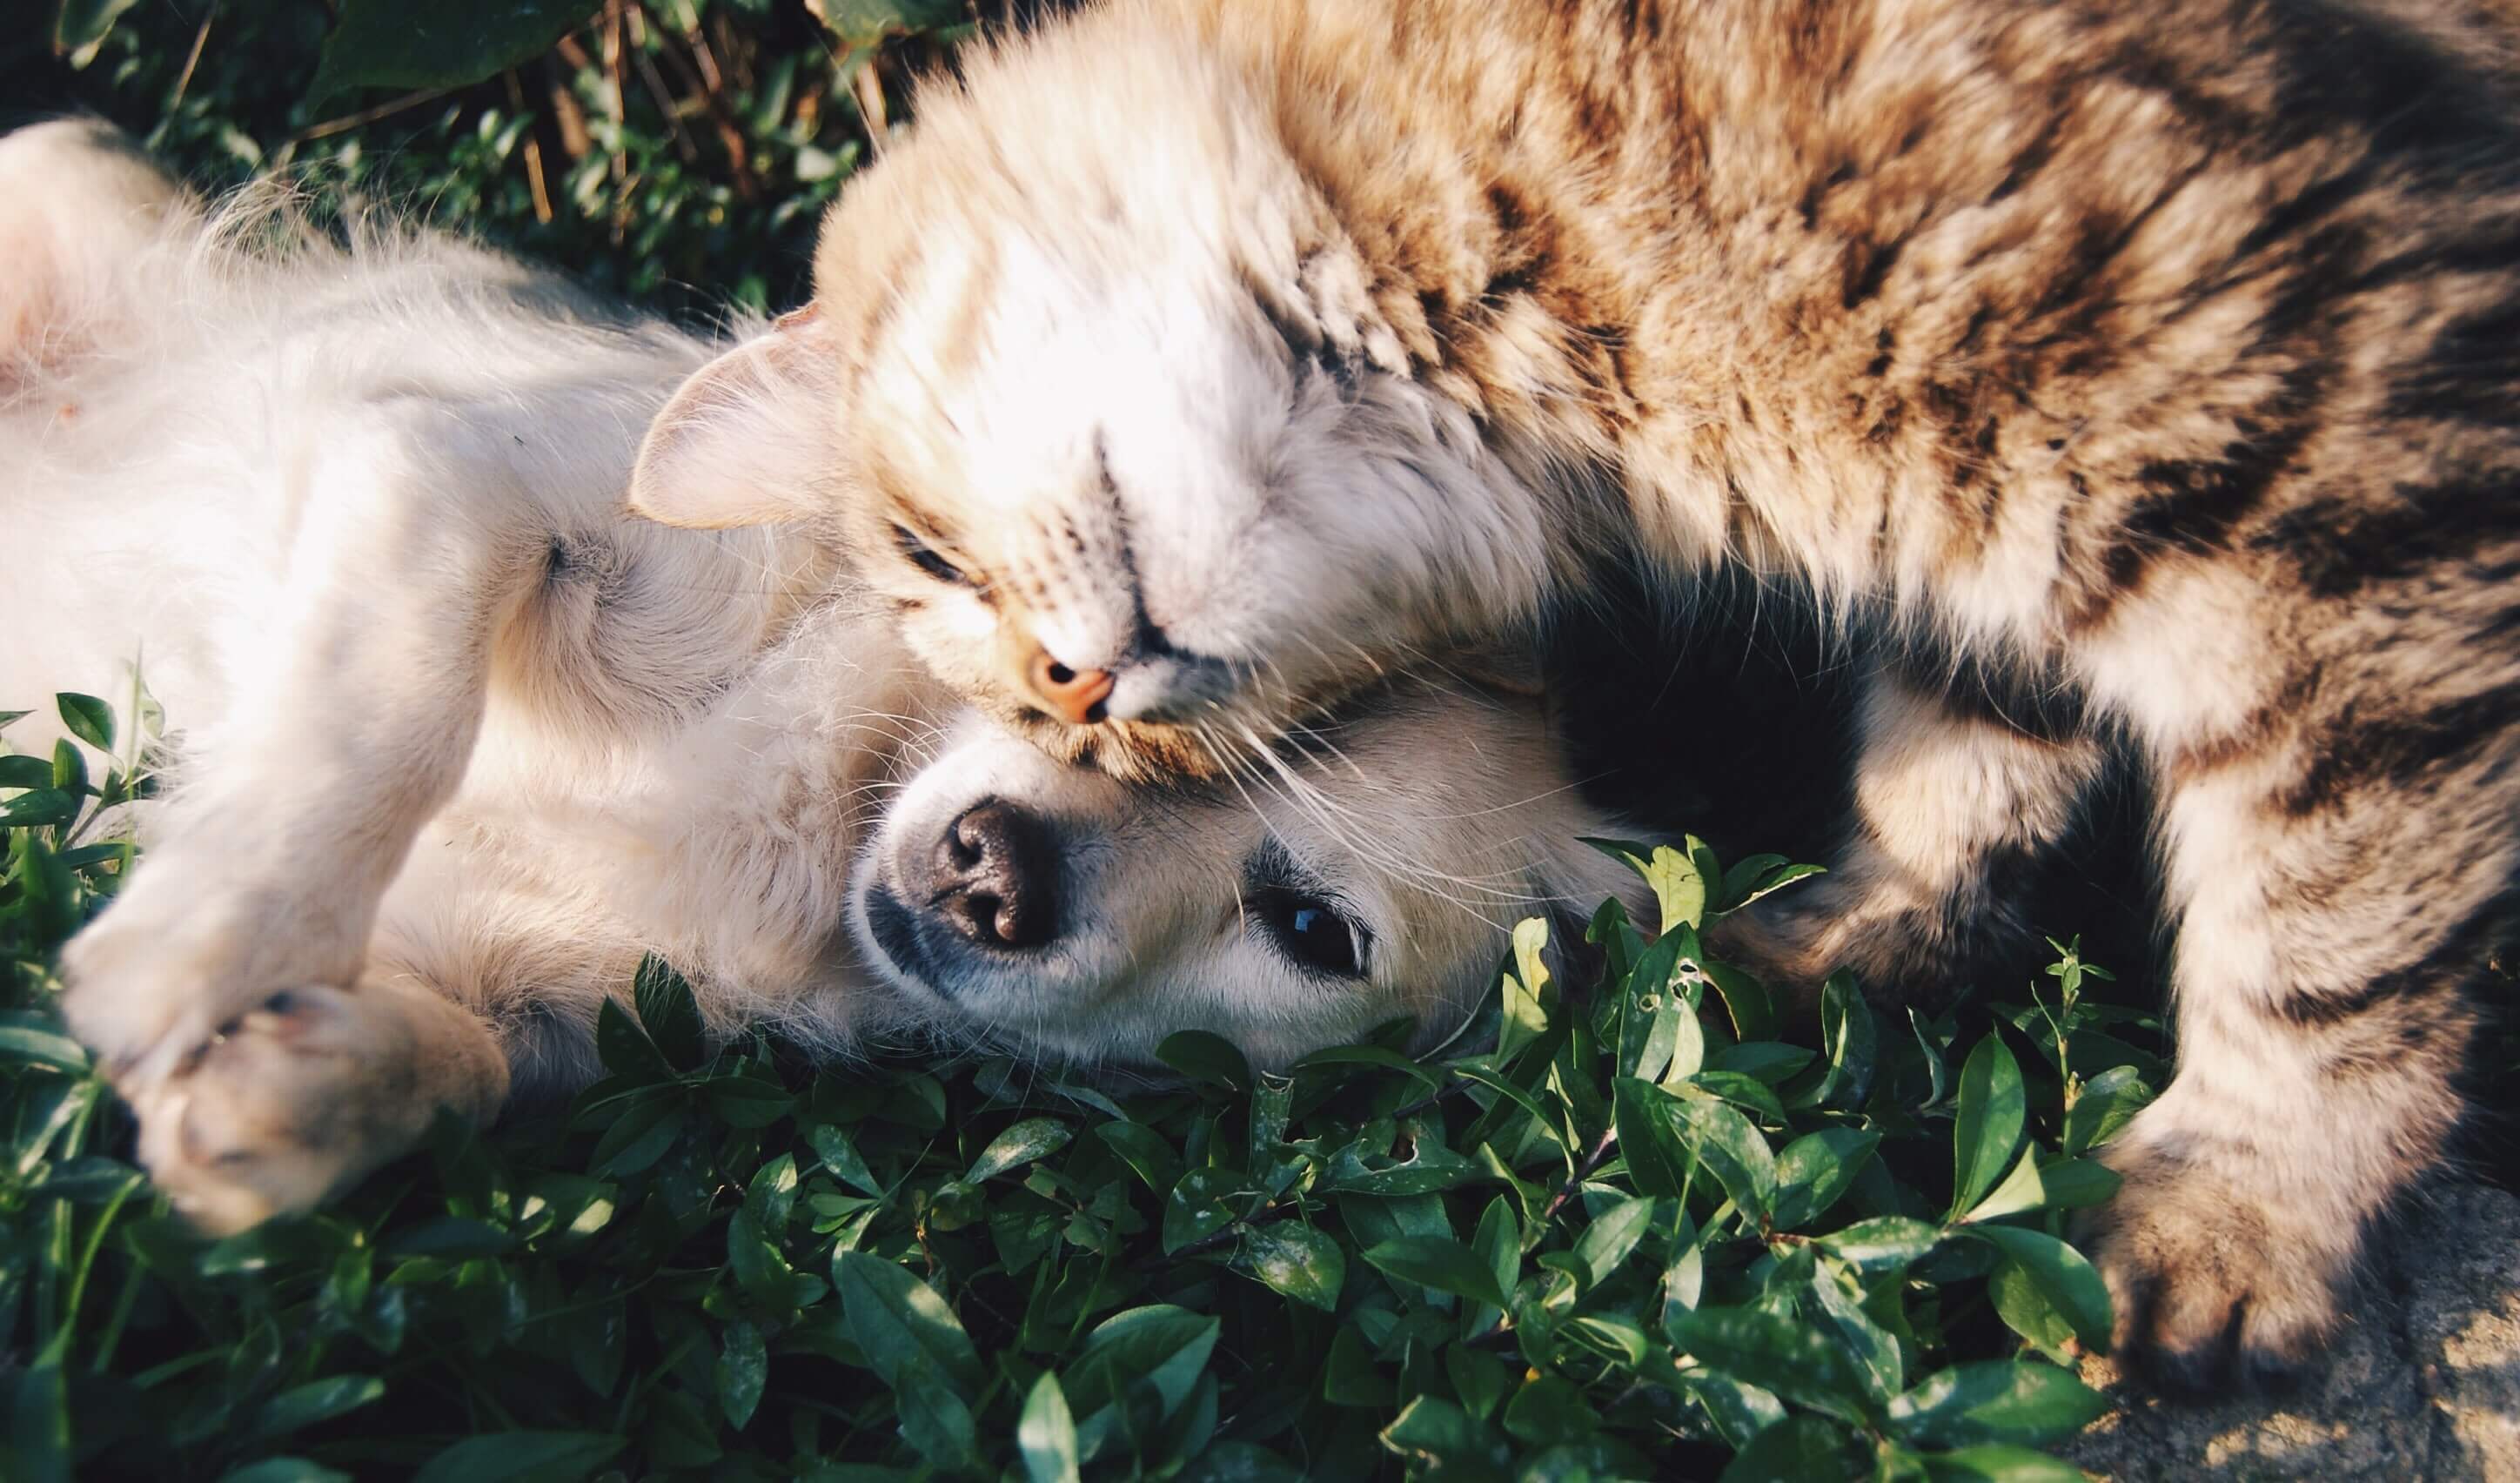 A white dog and a brown tabby cat snuggling in the grass.